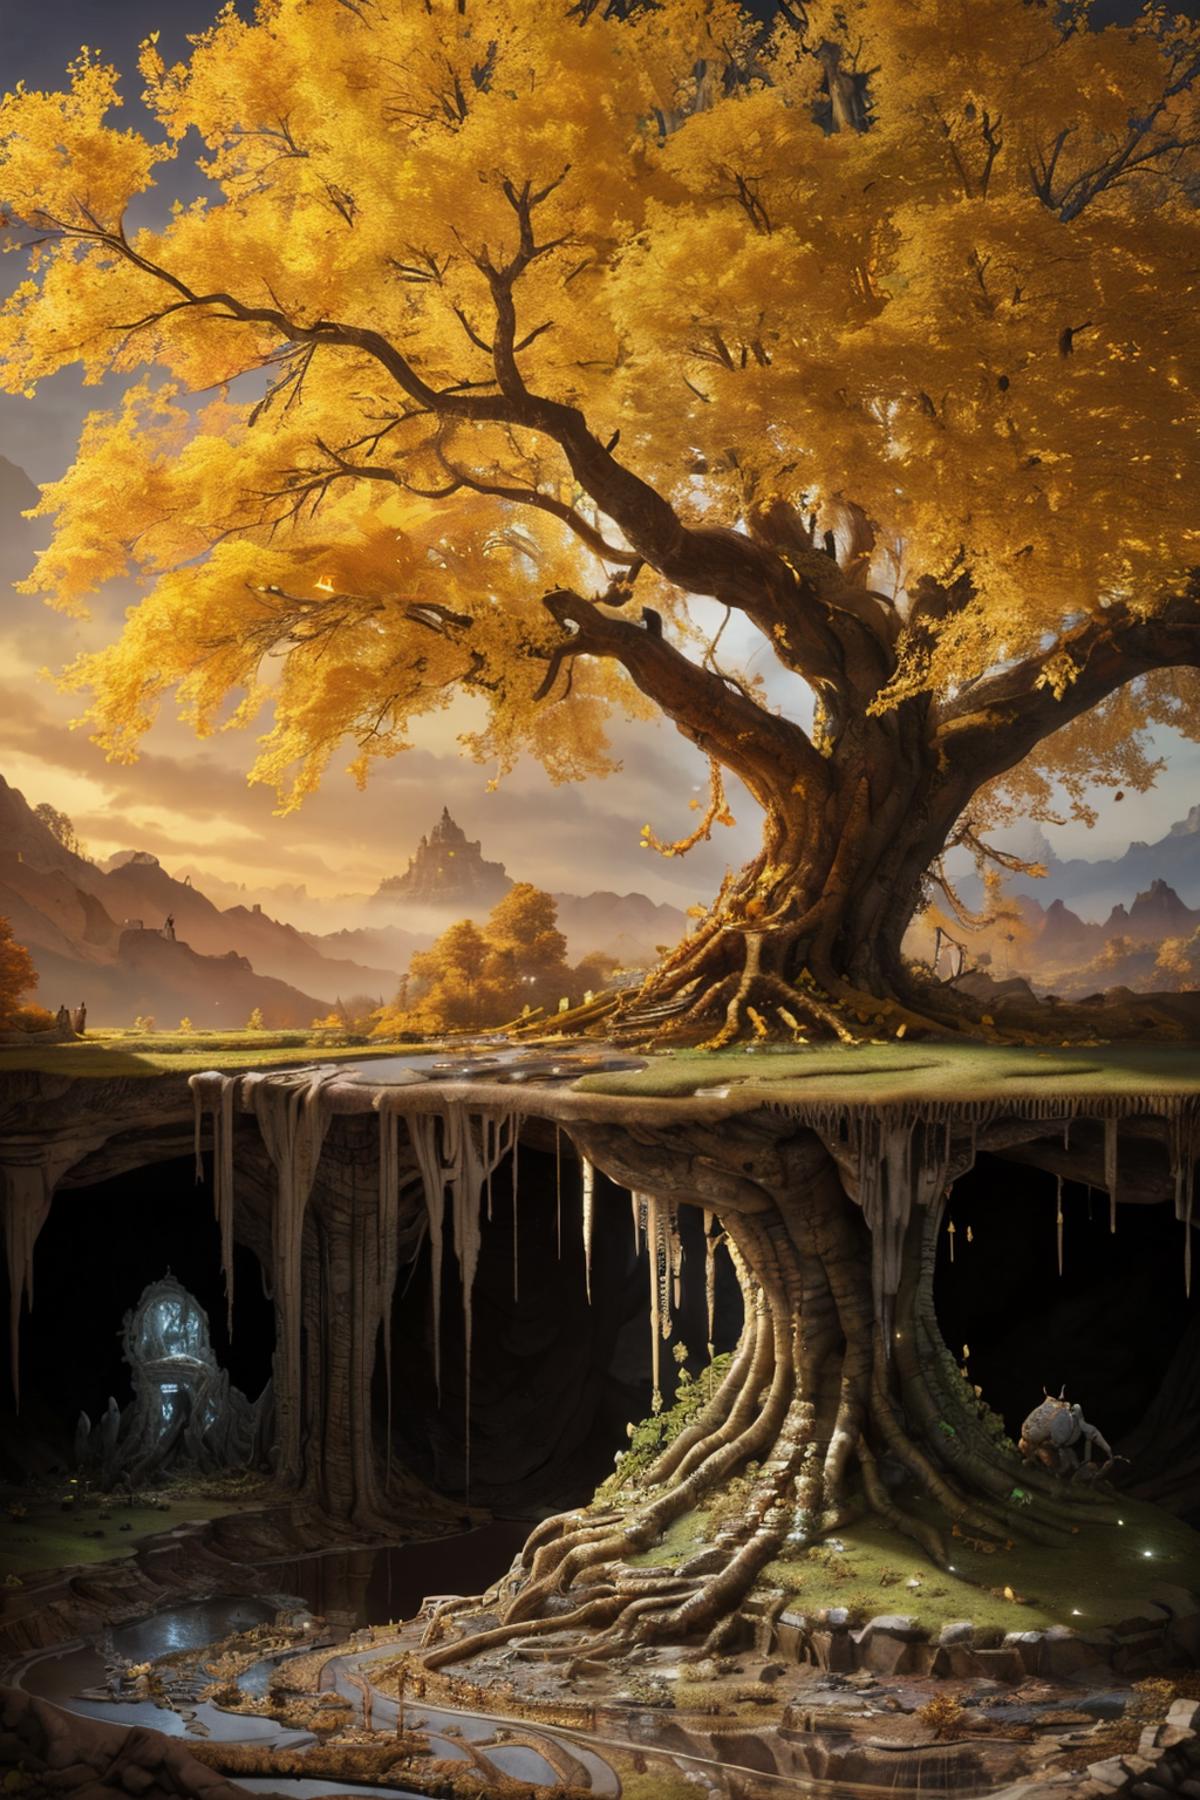 A fantastical scene of a tree with a cave underneath it, surrounded by misty mountains and icy water.